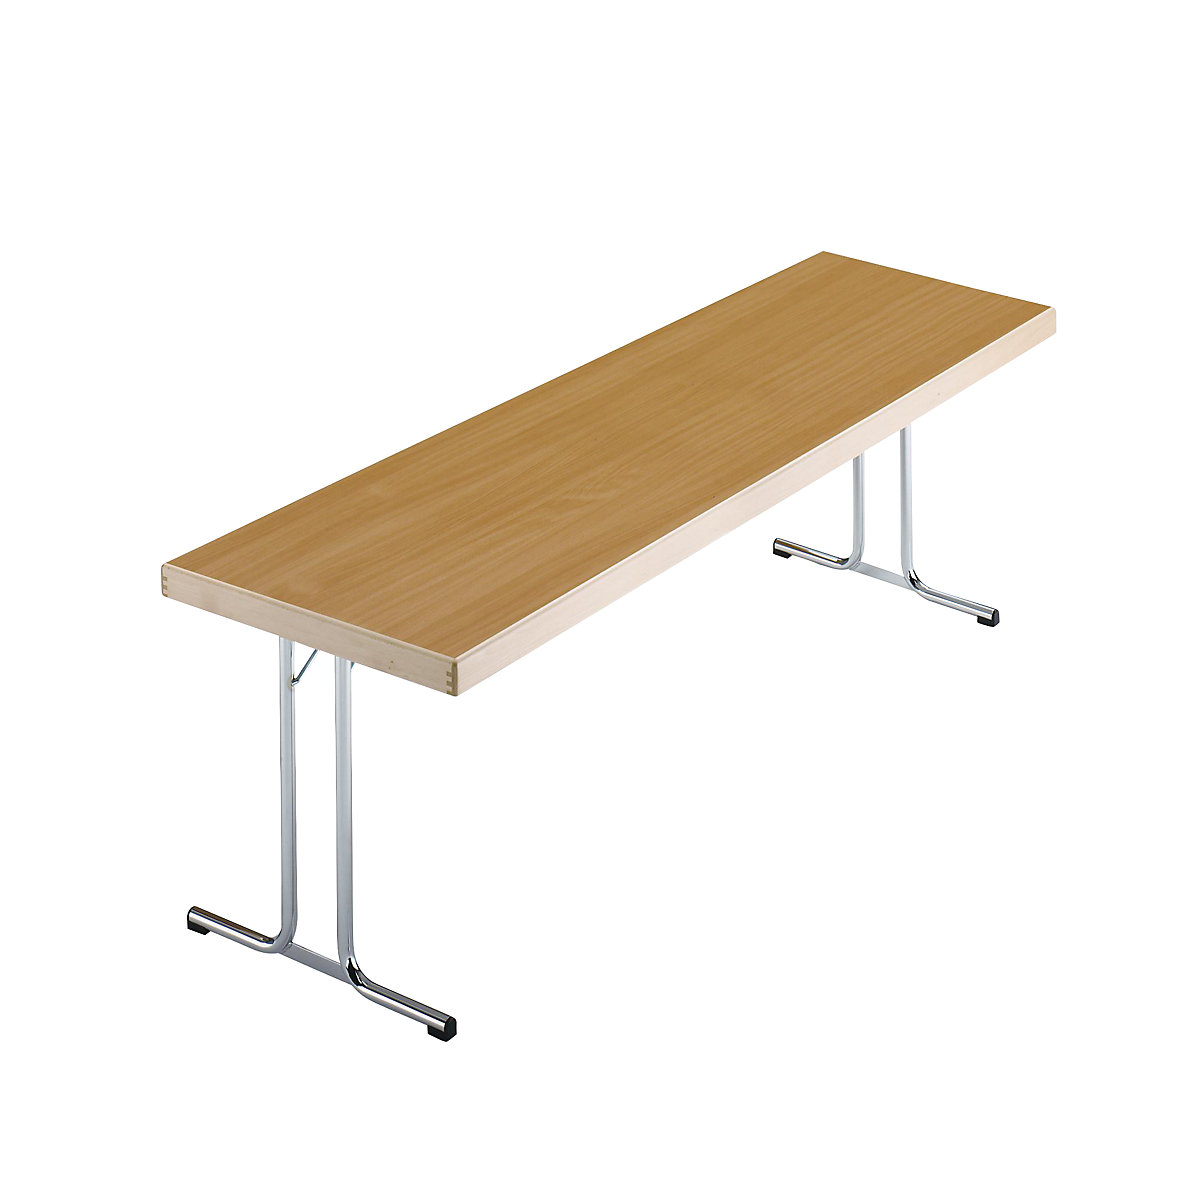 Folding table, double T-foot stand, 1700 x 700 mm, chrome plated frame, beech finish tabletop-5